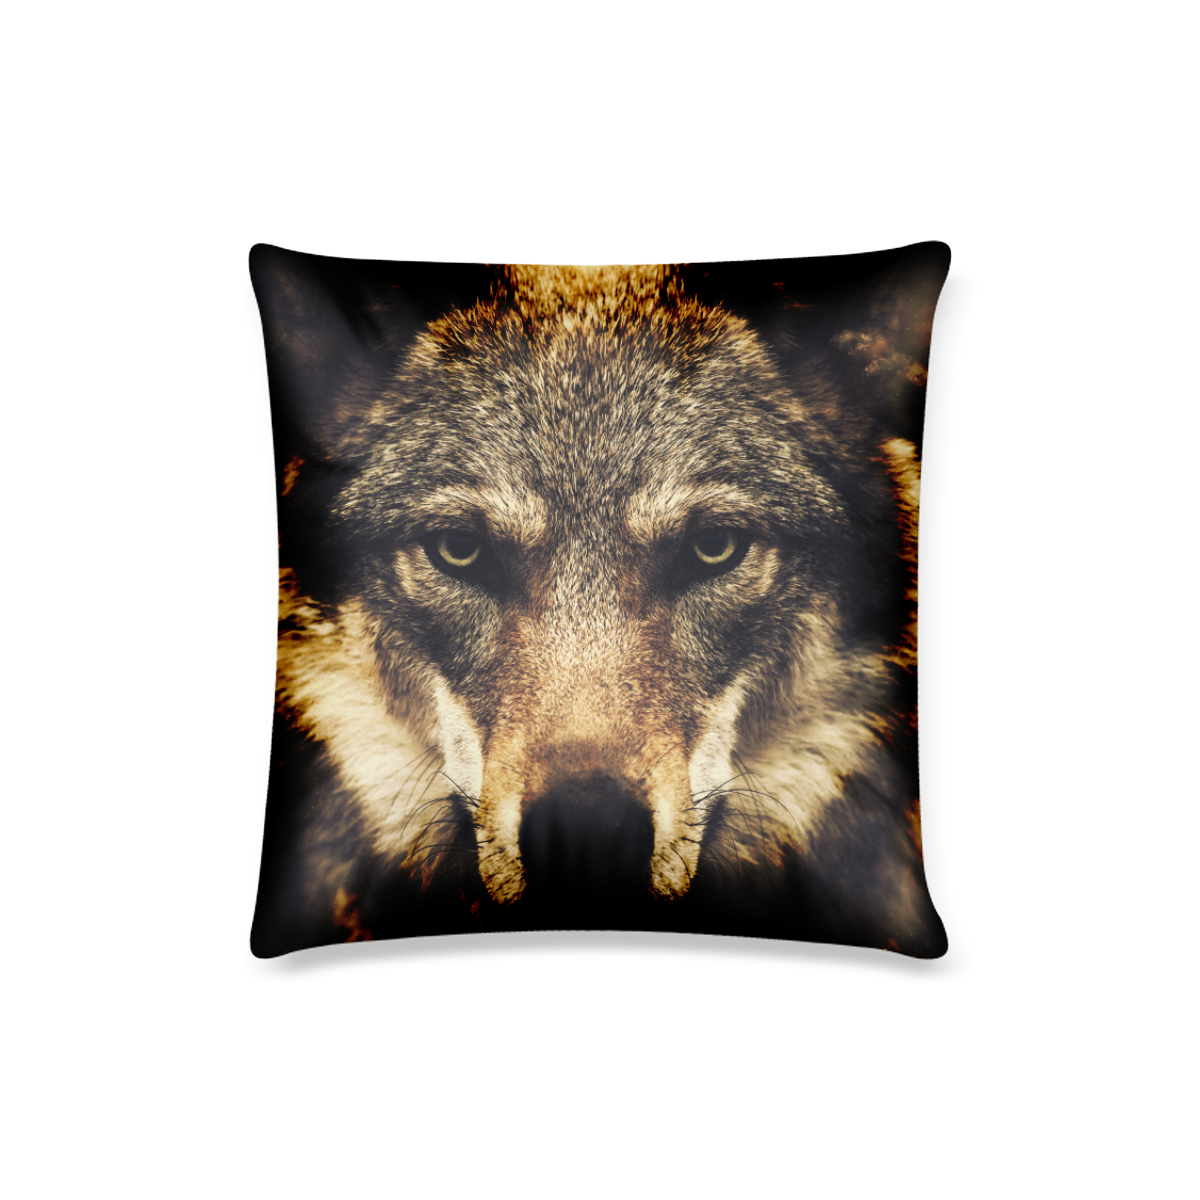 Wolf 2 Animal Nature Custom Pillow Case 16"x16"  (One Side Printing) No Zipper